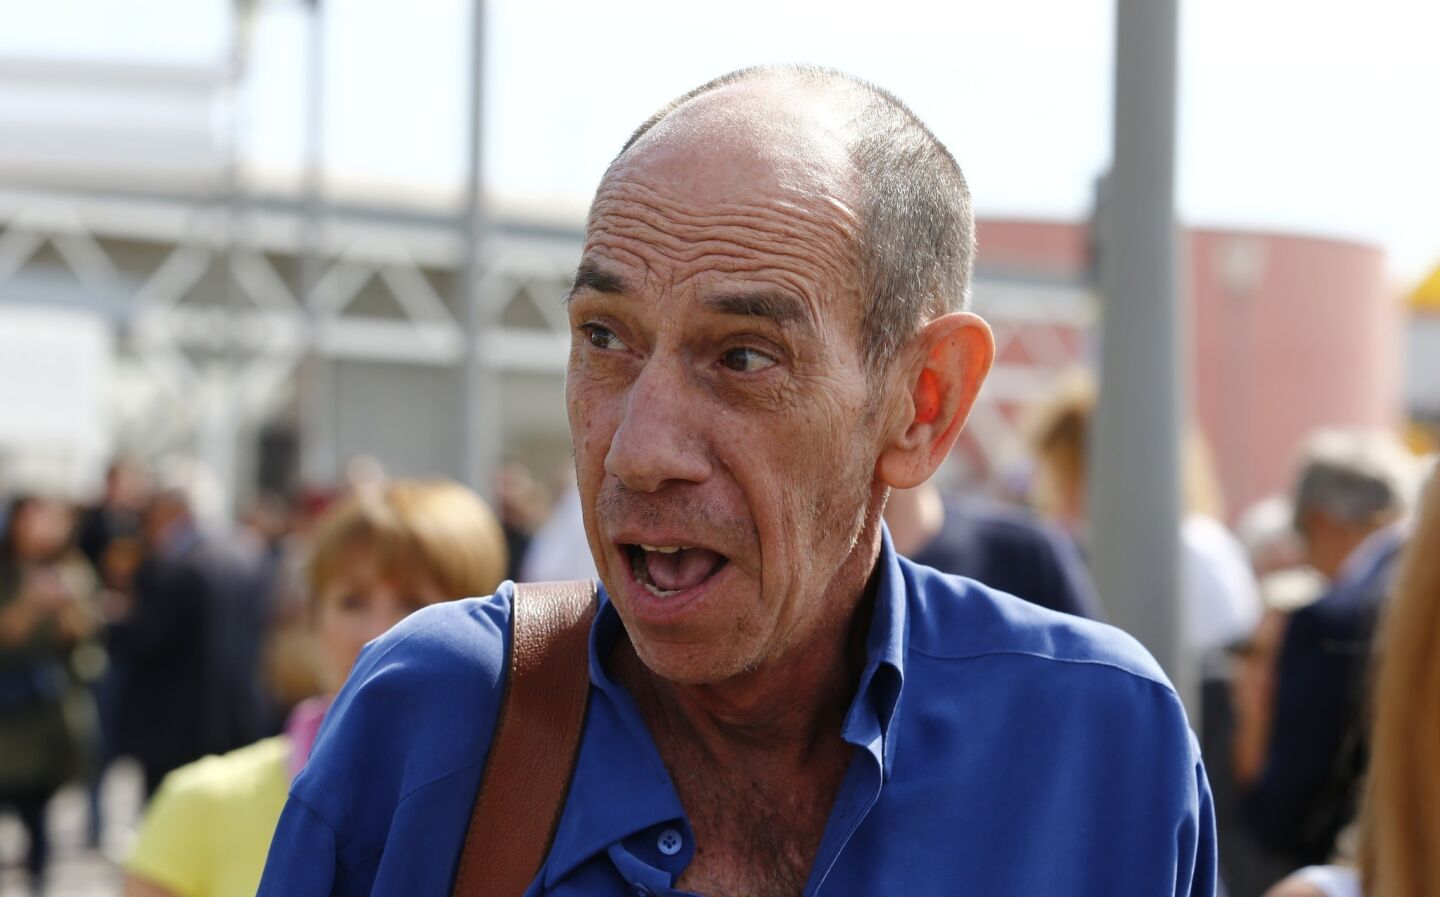 Miguel Ferrer, whose mom is the late Rosemary Clooney, is George Clooney's cousin.